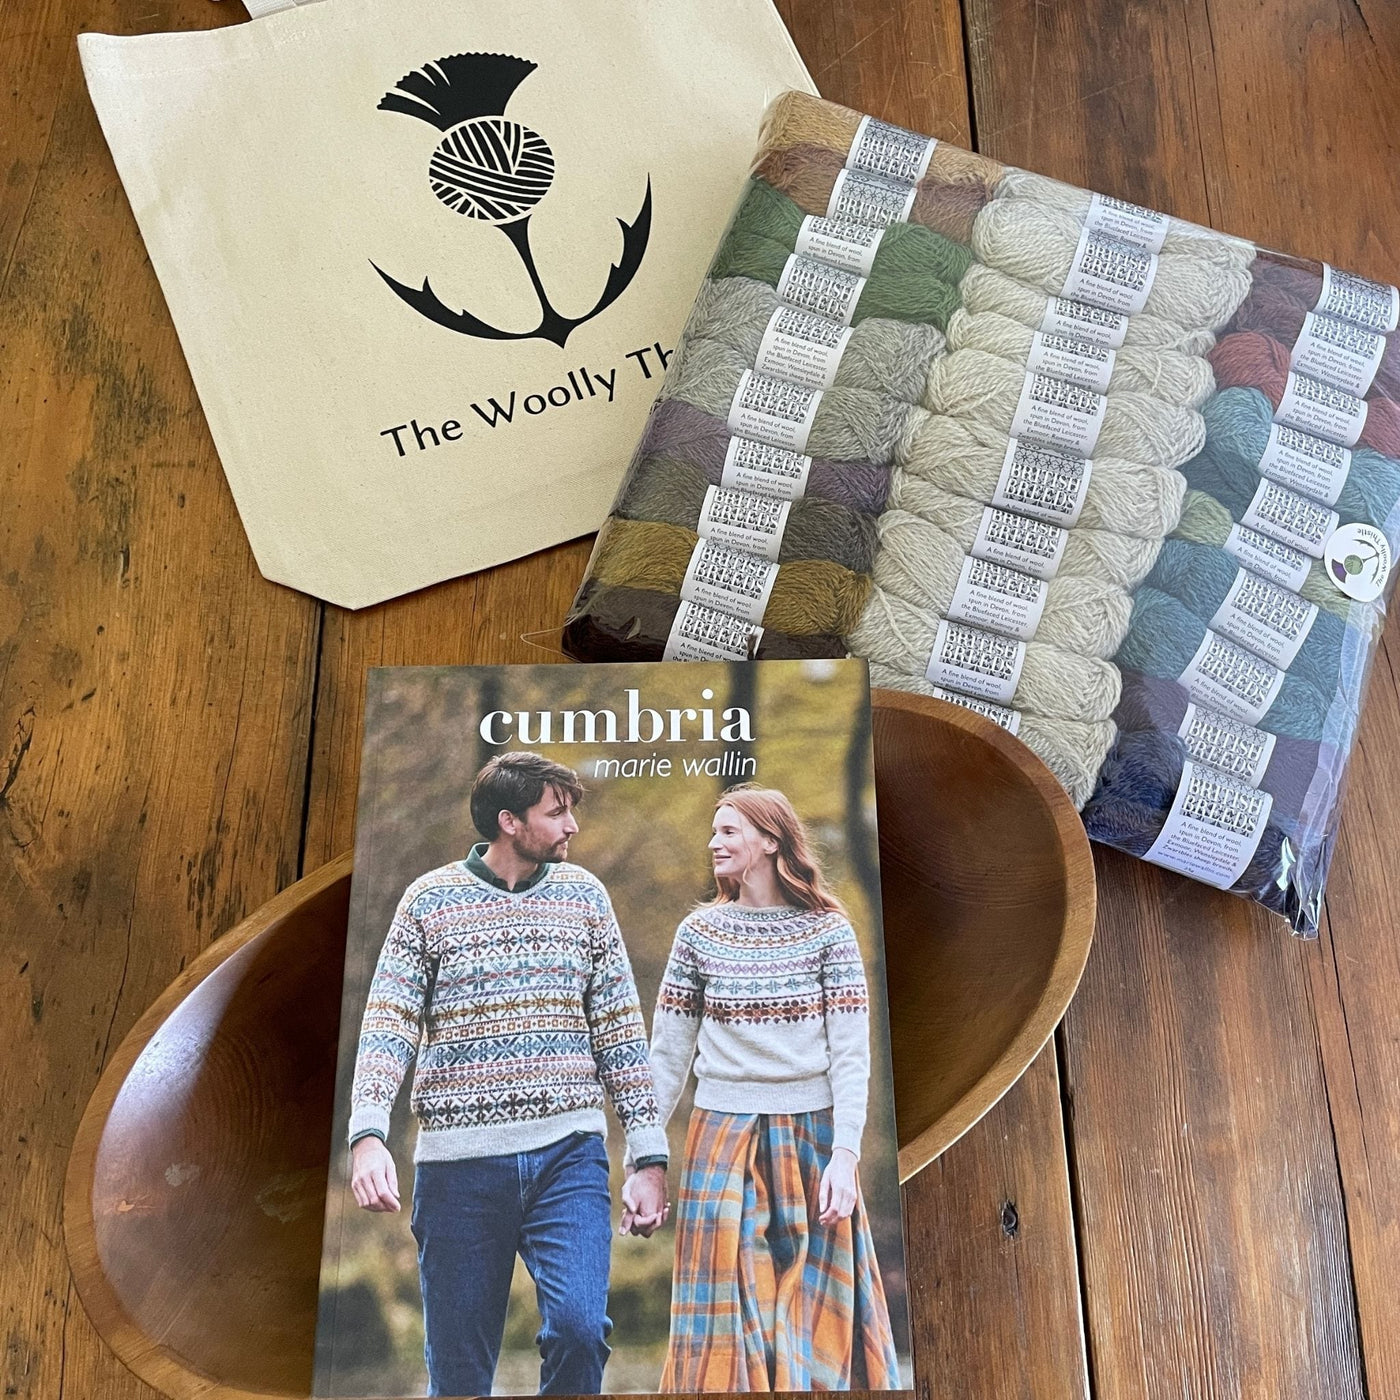 Marie Wallin's Book Cumbria with Rydal sweater components of kit including all yarn needed to knit sweater along with a Woolly Thistle Tote.